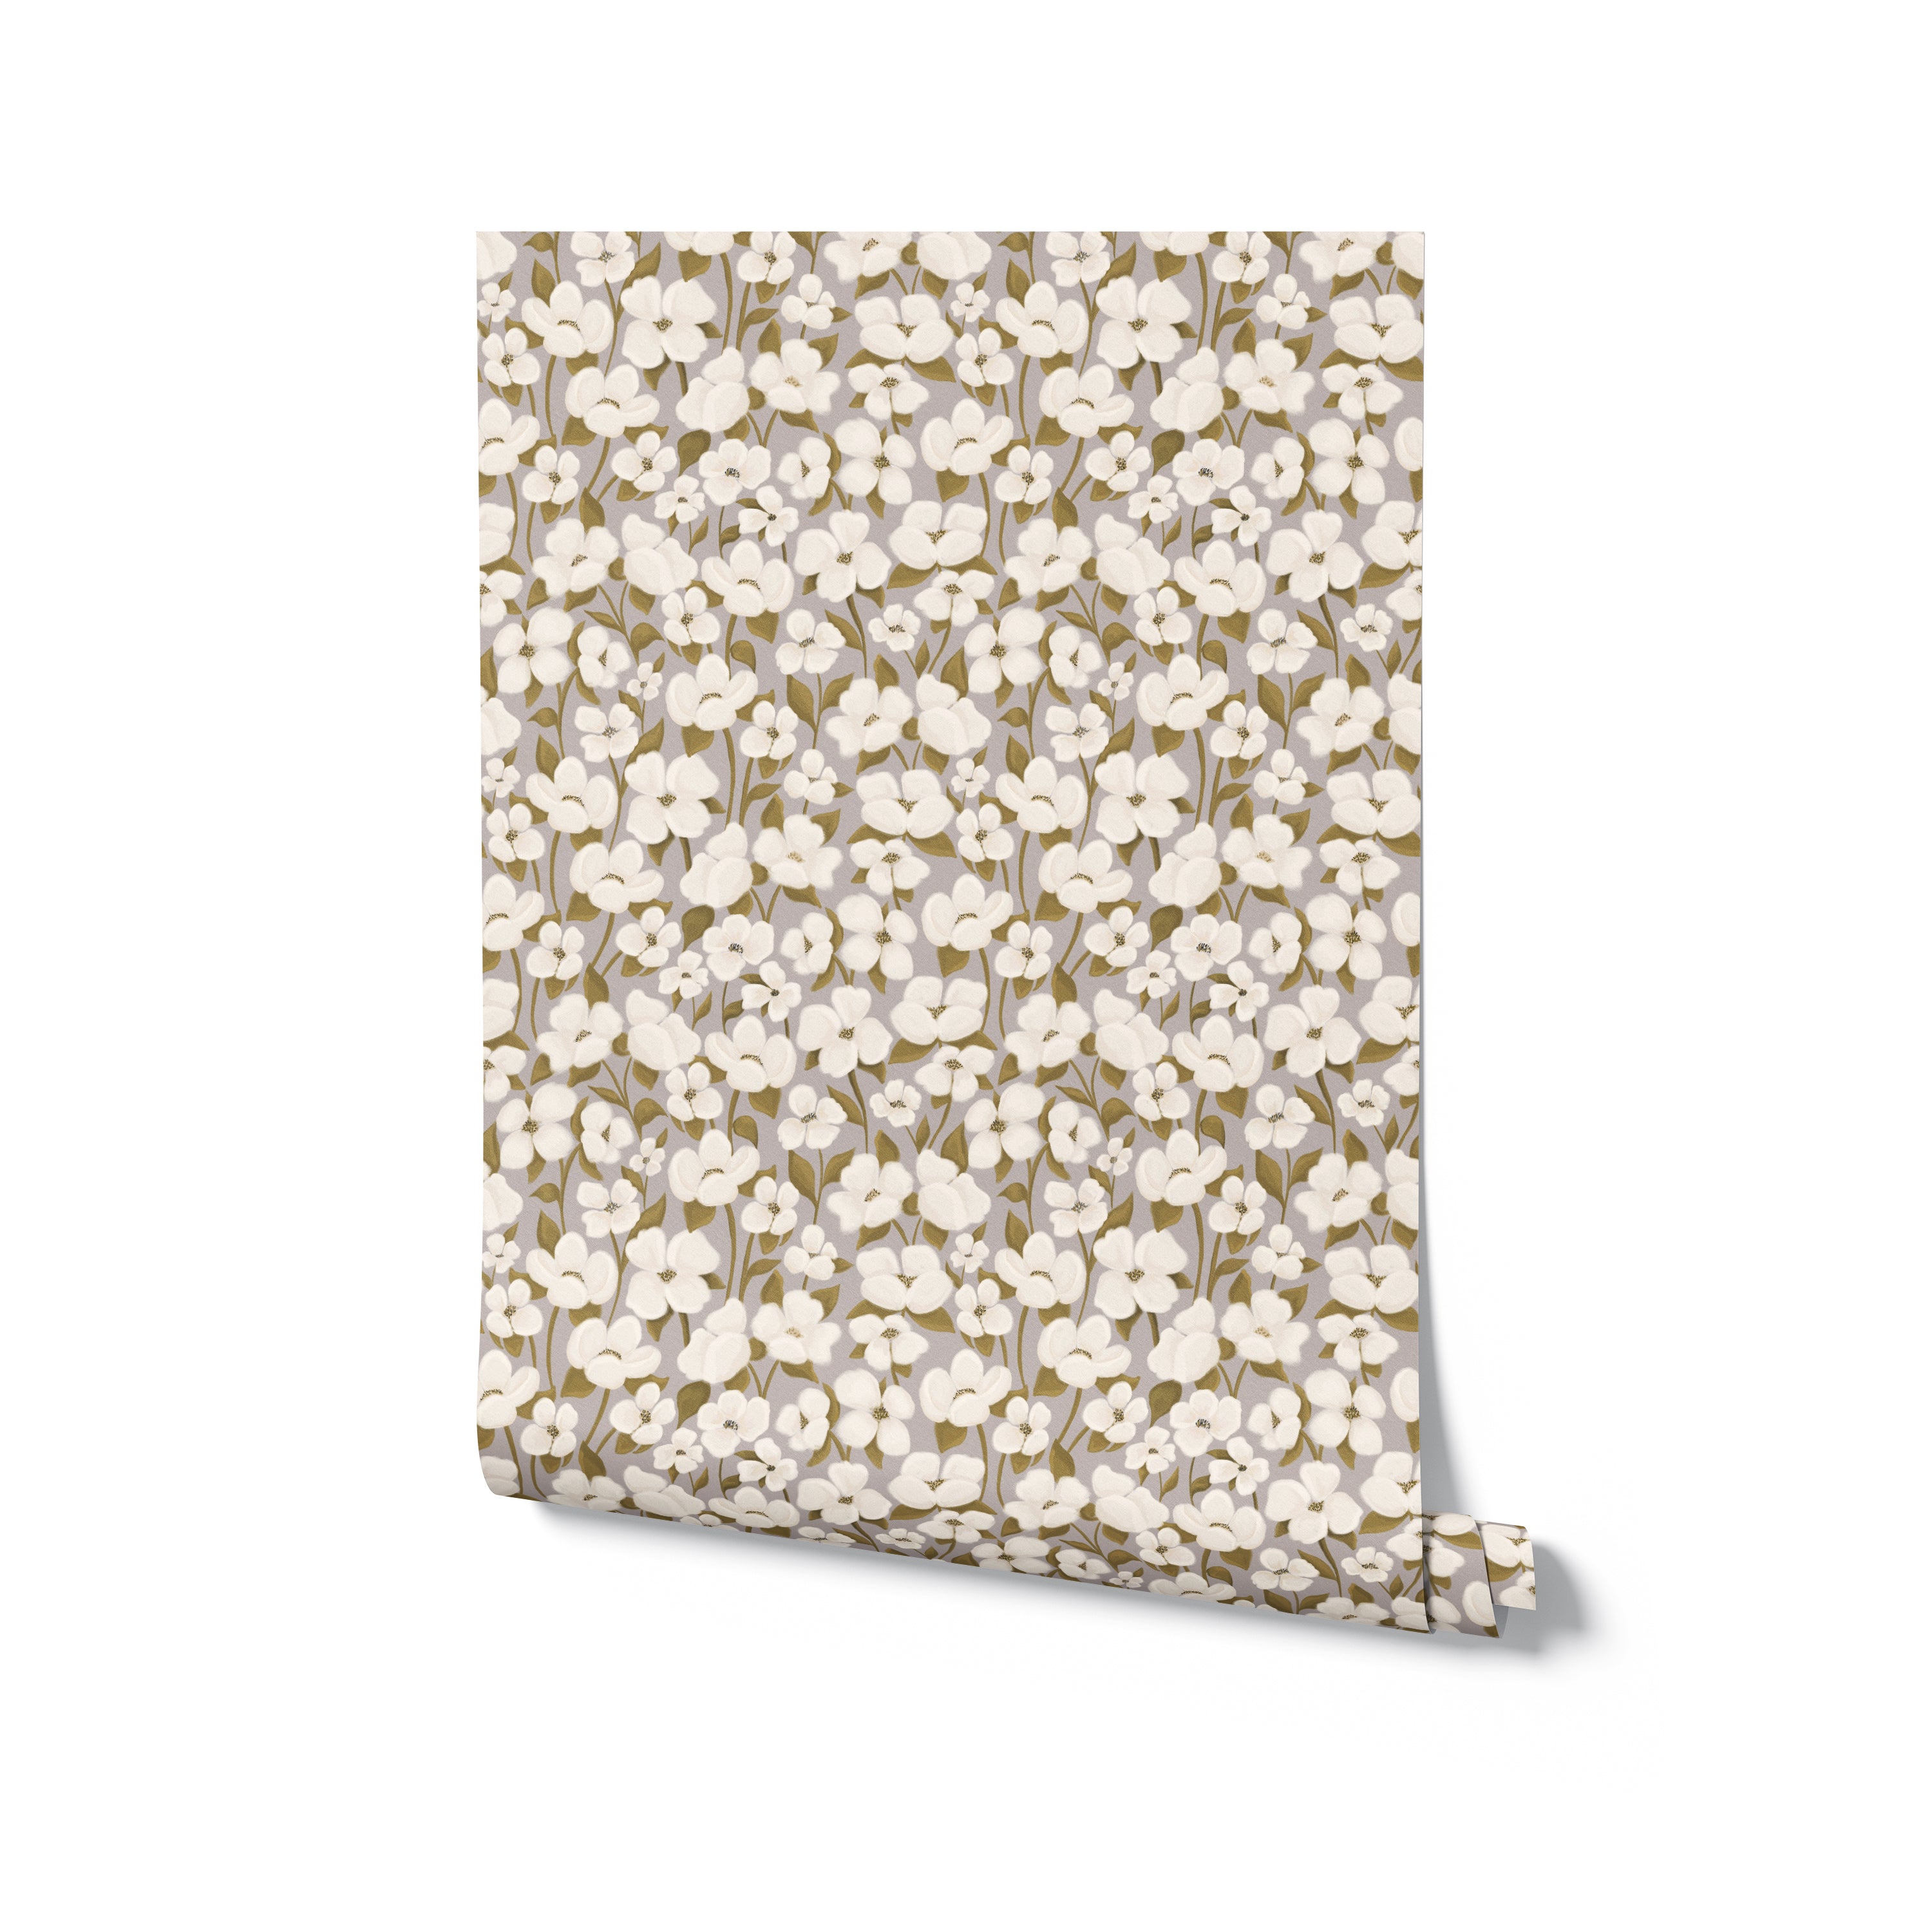 A roll of wallpaper unfurled slightly to show a repeat pattern of white flowers with dark centers and green leaves on a neutral beige background. The pattern is dense and organic, reminiscent of a spring meadow, perfect for creating a fresh, airy feel in an interior space.